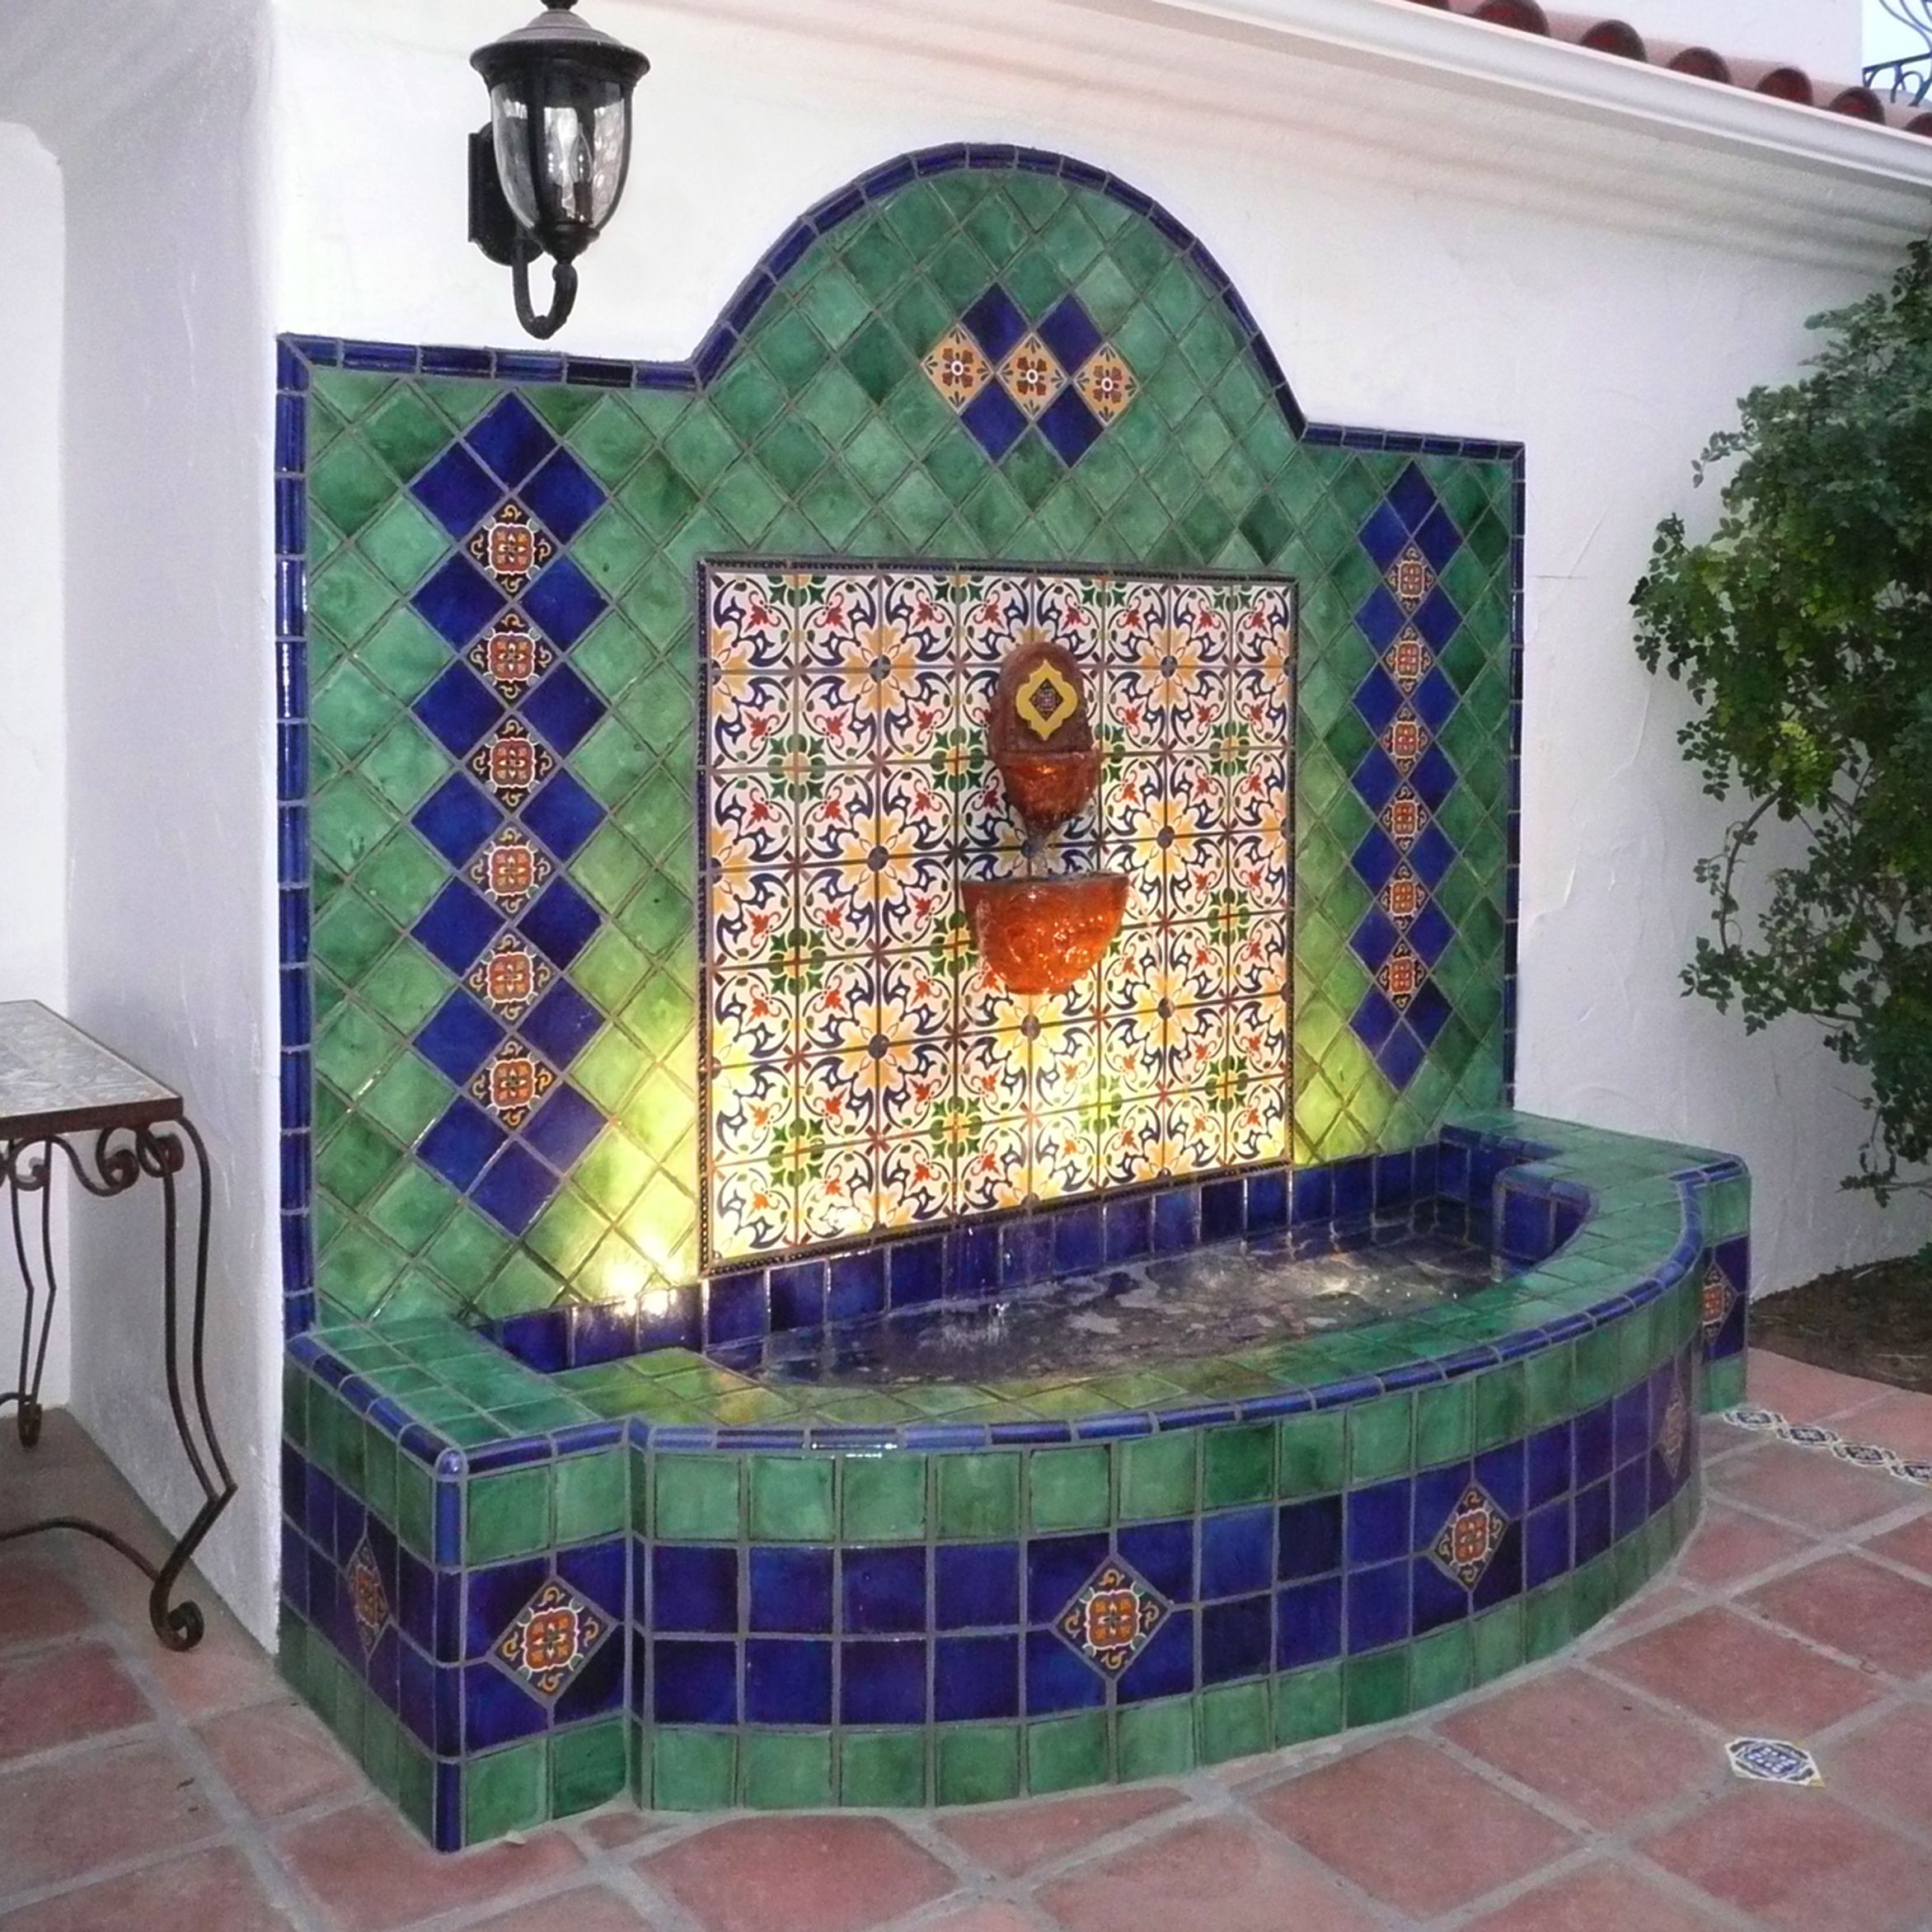 blue vase water fountains outdoor of wall fountain with lights using mexican tiles by kristiblackdesigns regarding wall fountain with lights using mexican tiles by kristiblackdesigns com